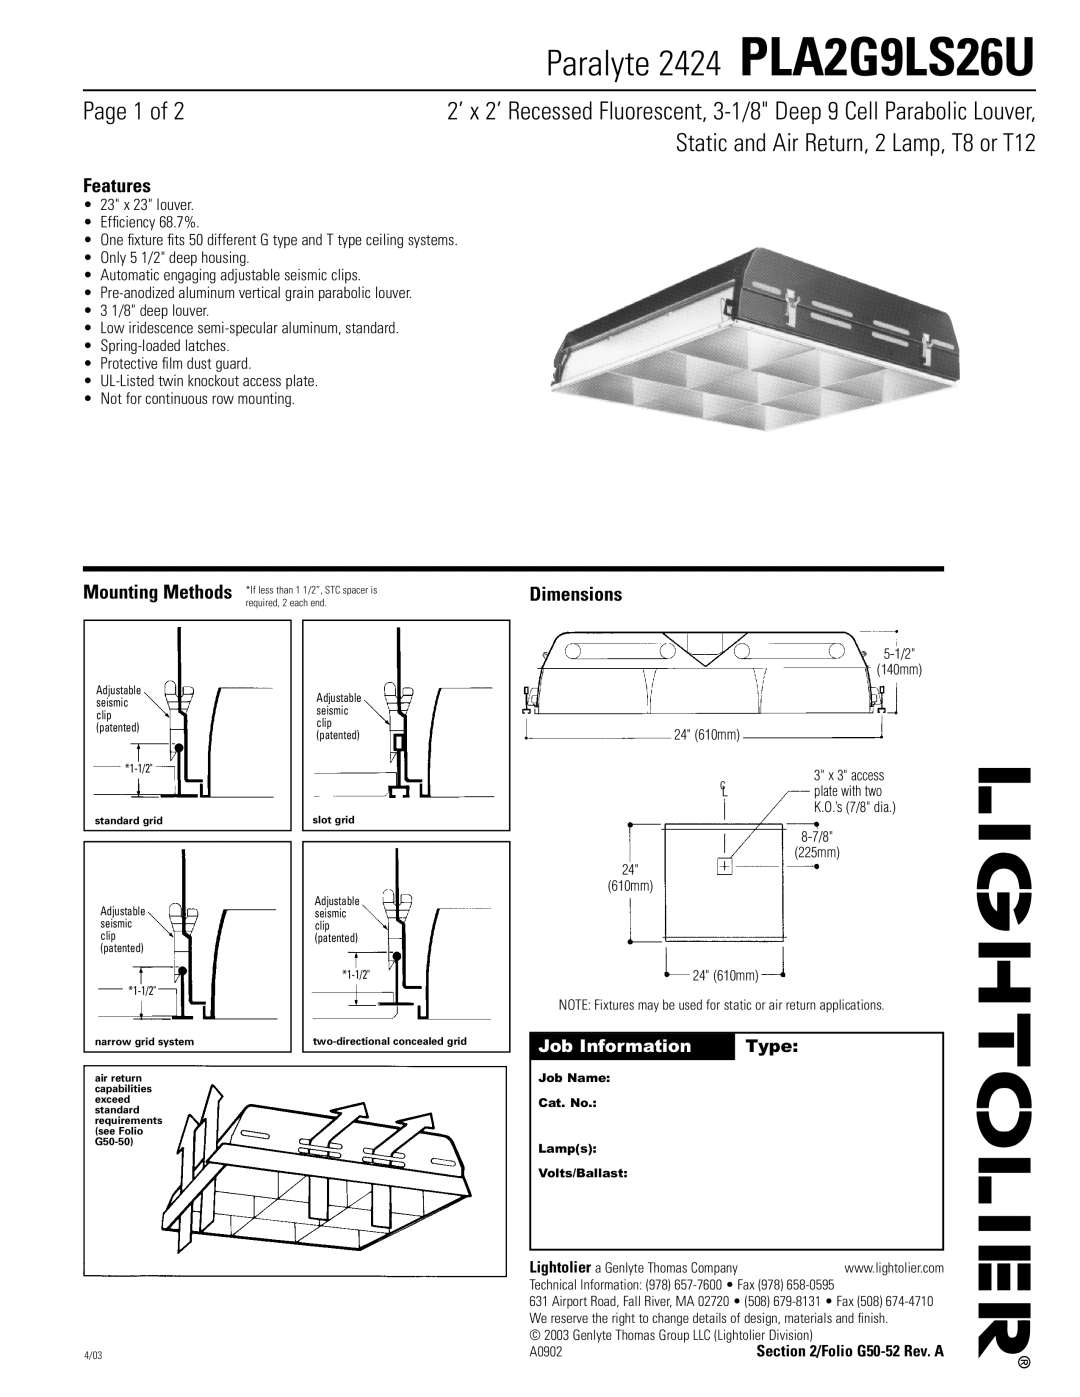 Lightolier dimensions Paralyte 2424 PLA2G9LS26U, Page 1 of, Static and Air Return, 2 Lamp, T8 or T12, Features, Type 